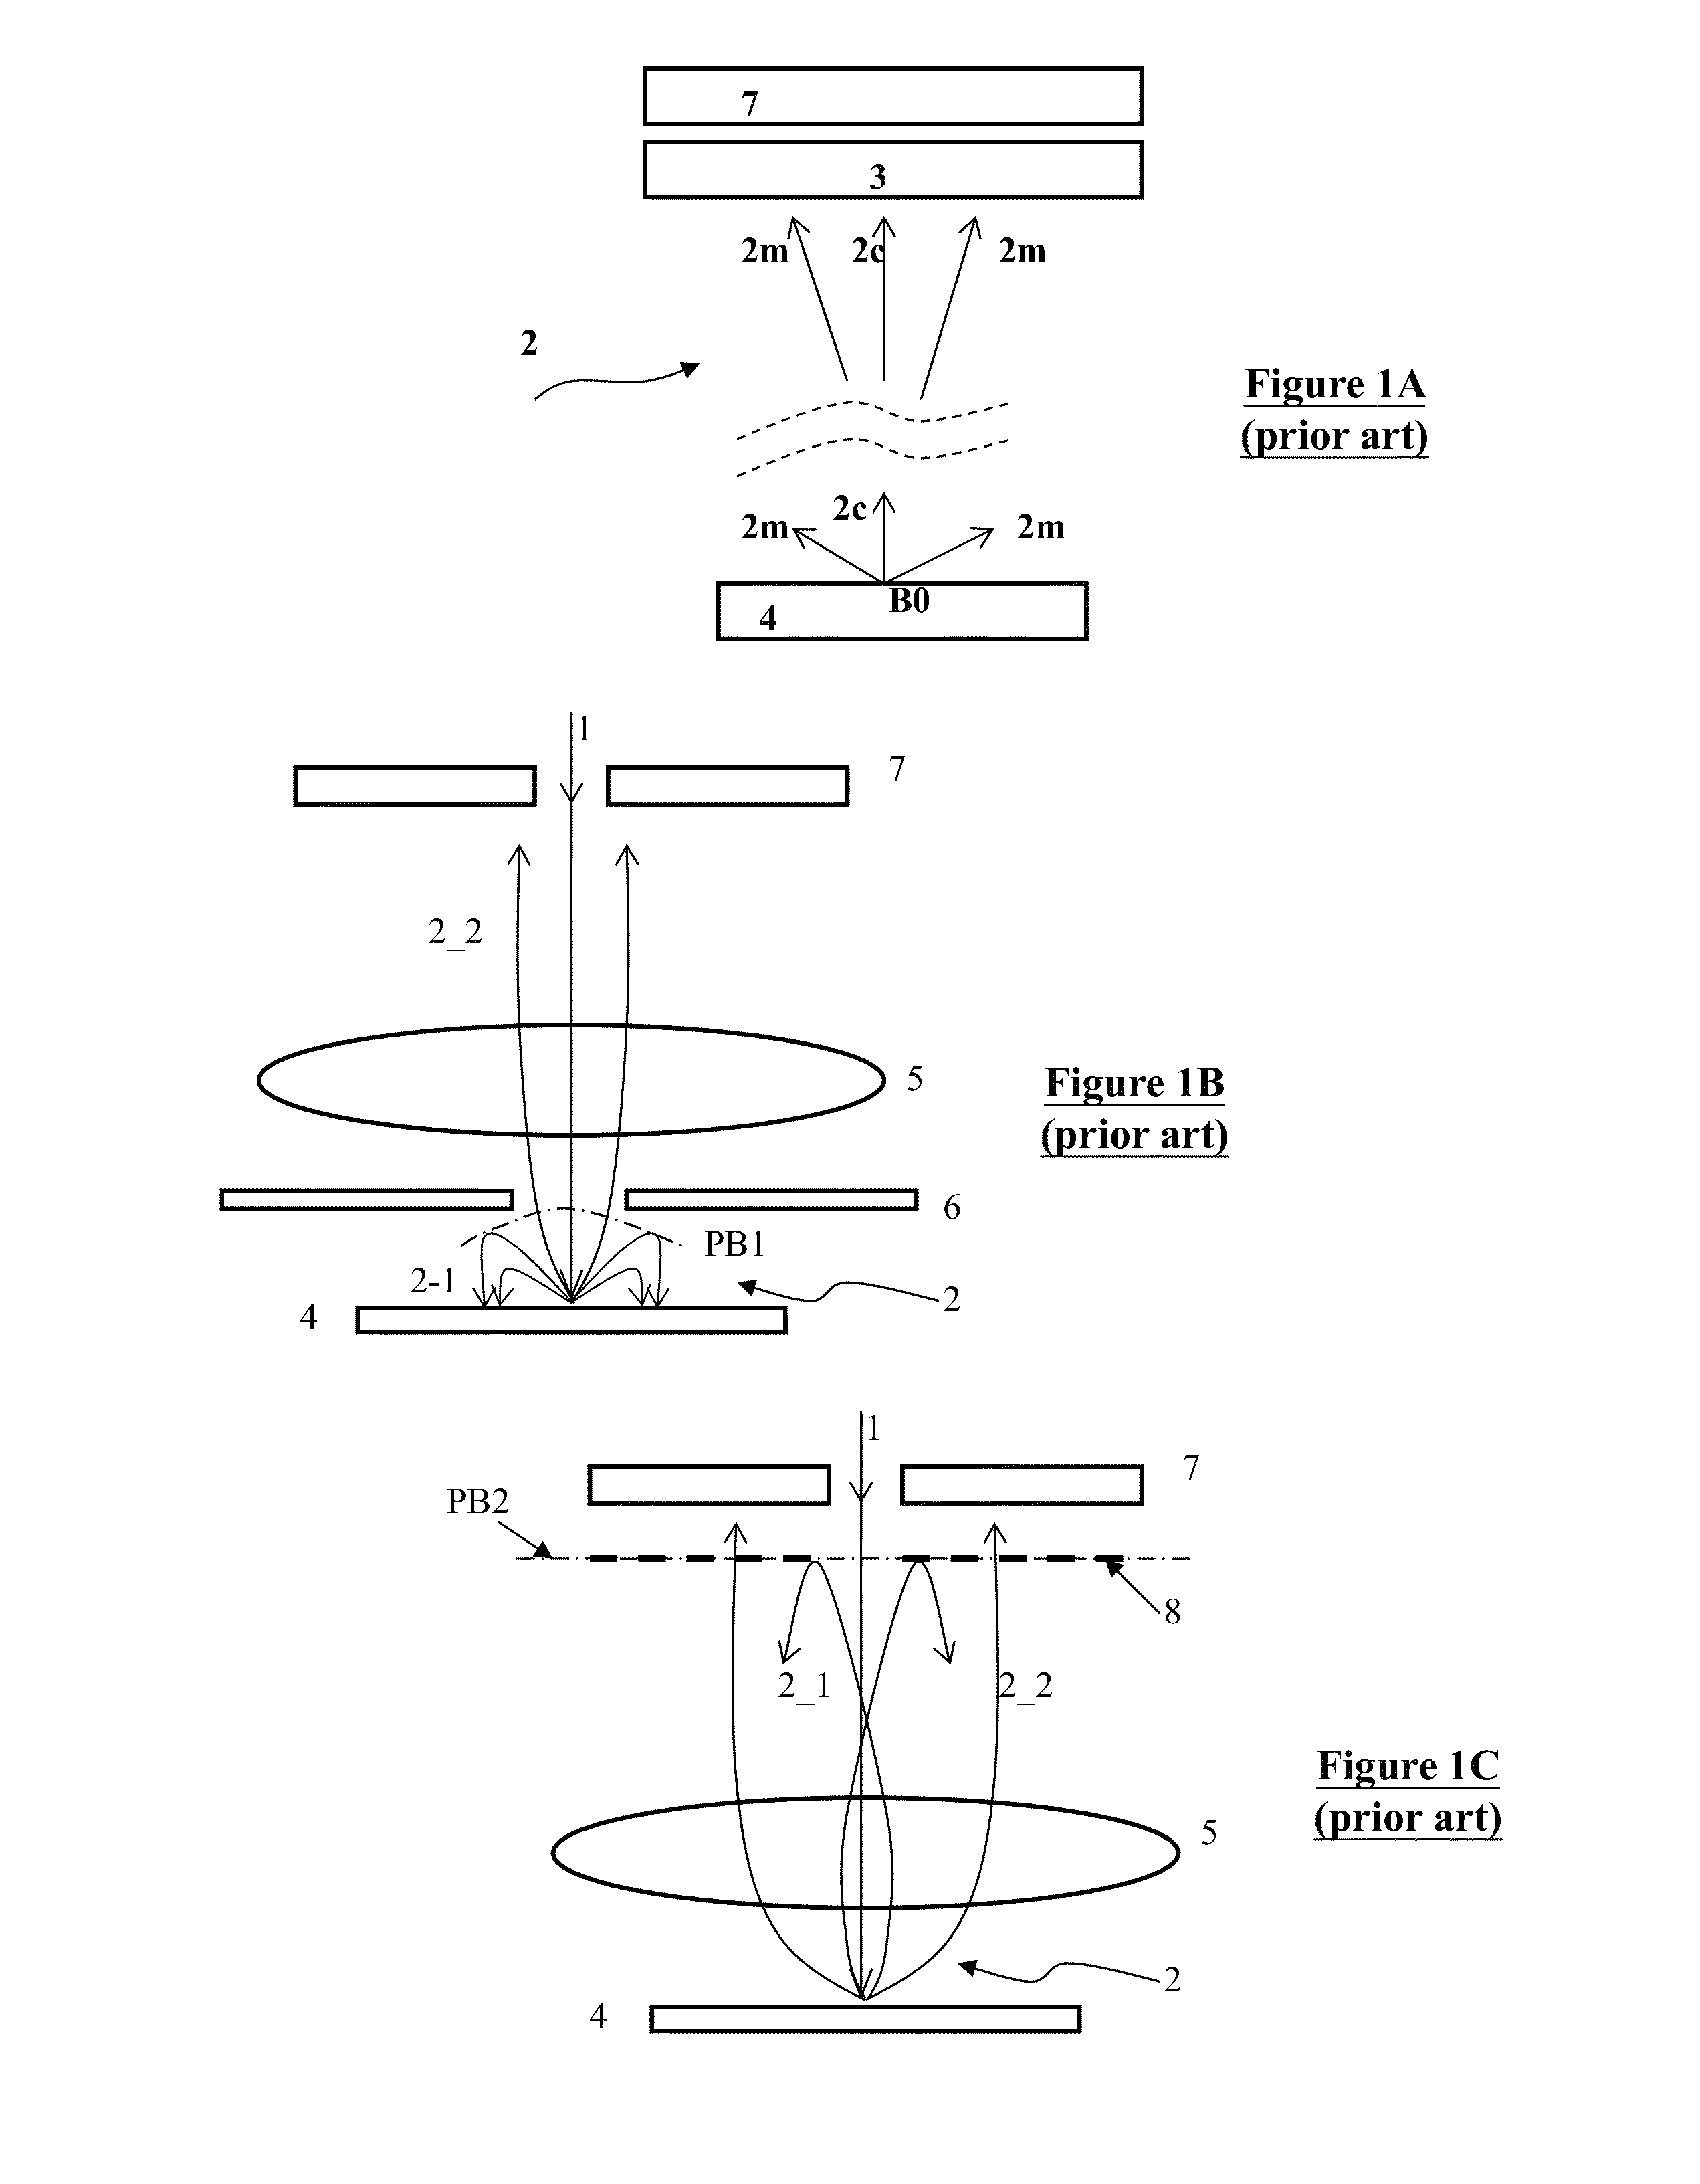 Energy Filter for Charged Particle Beam Apparatus